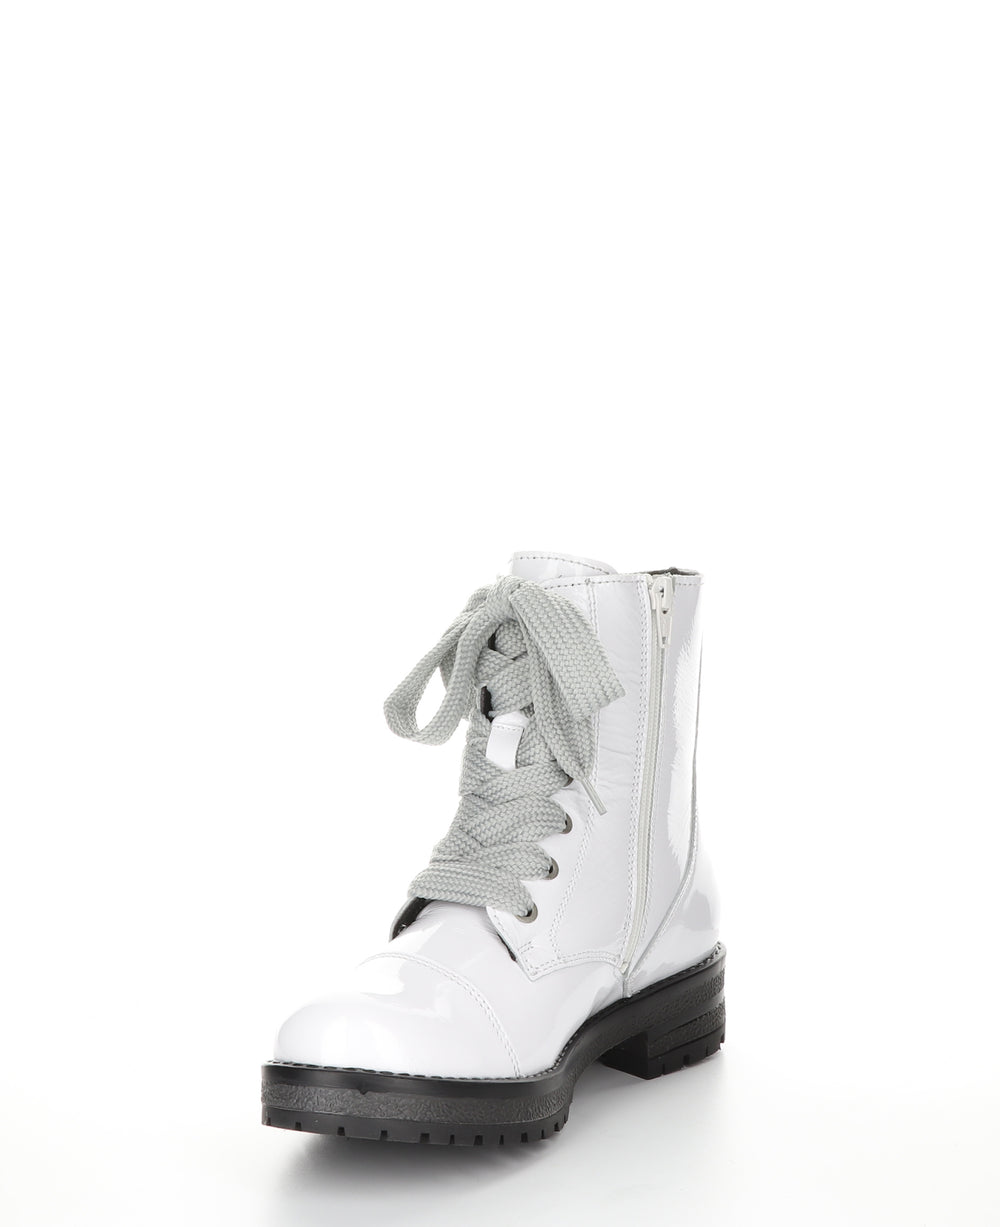 PAULIE White Zip Up Boots